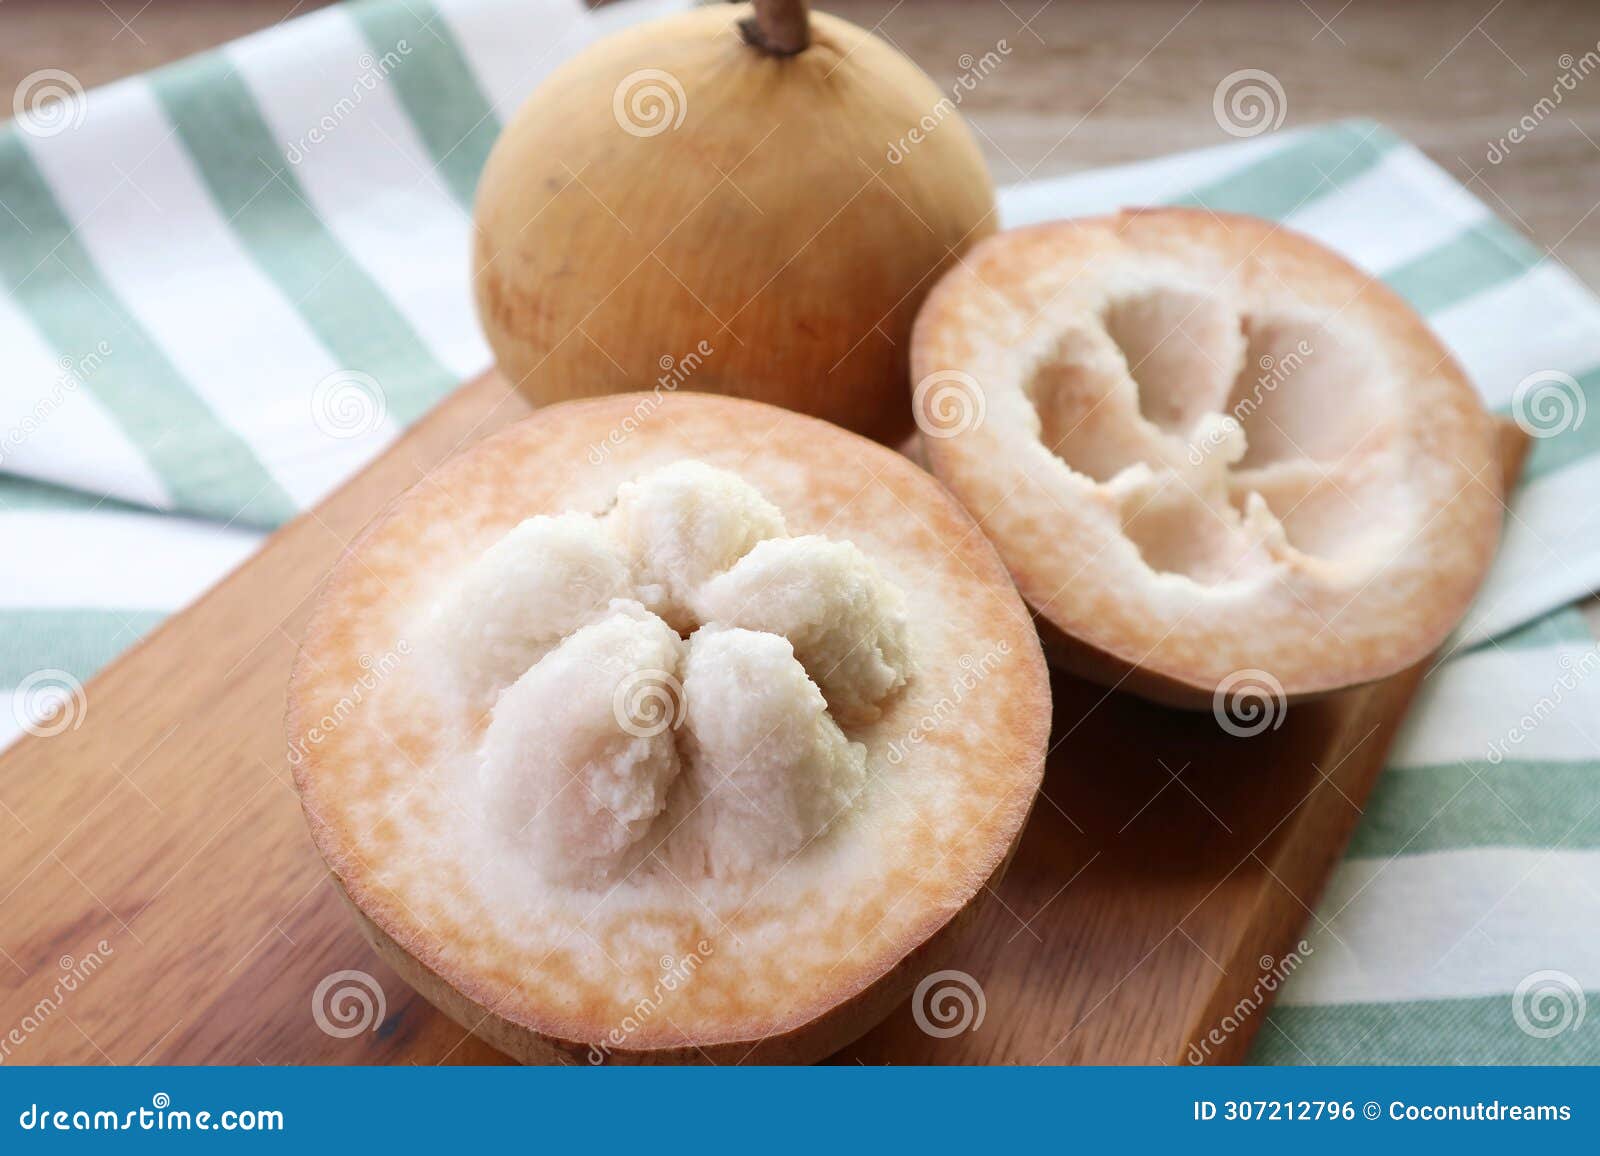 closeup of opened fresh cotton fruit or santol fruit with whole fruit in background